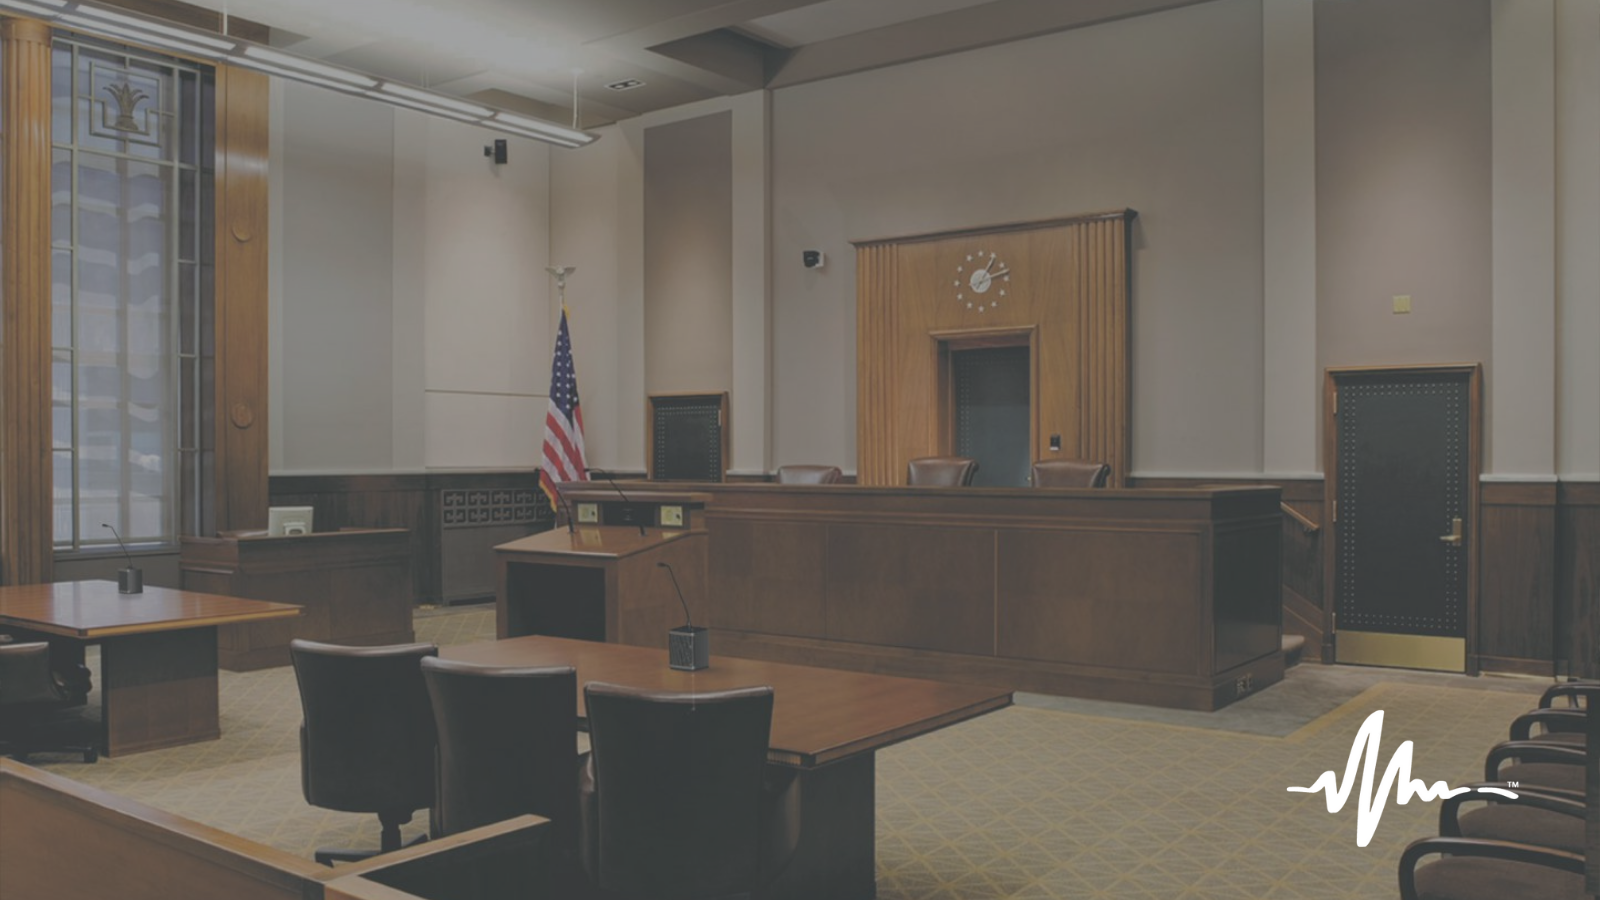 An image of a high-tech courtroom implemented by For The Record.